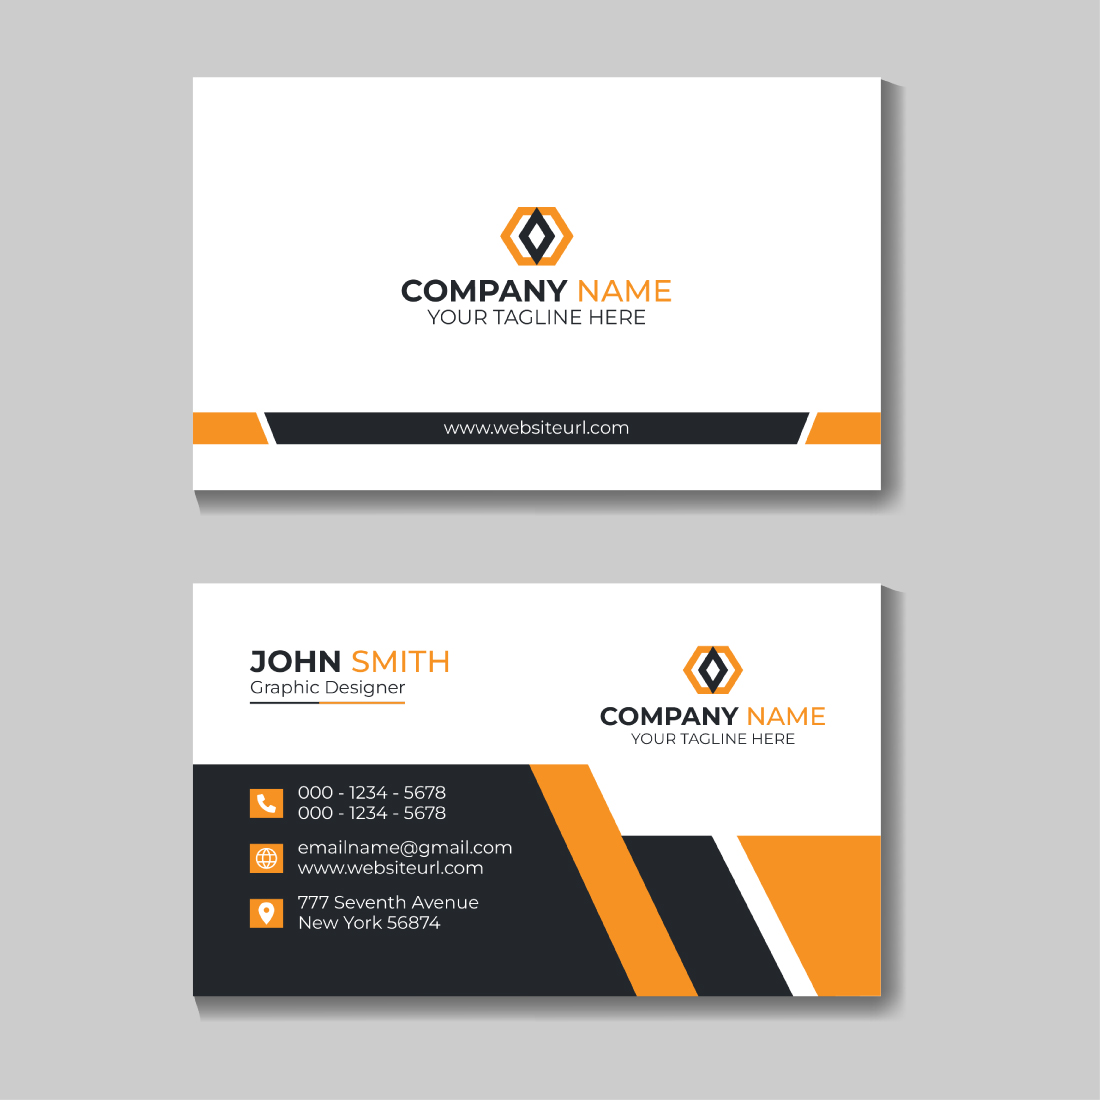 orange color Corporate Professional Creative Clean Business Card Design Template with 4 Colors.